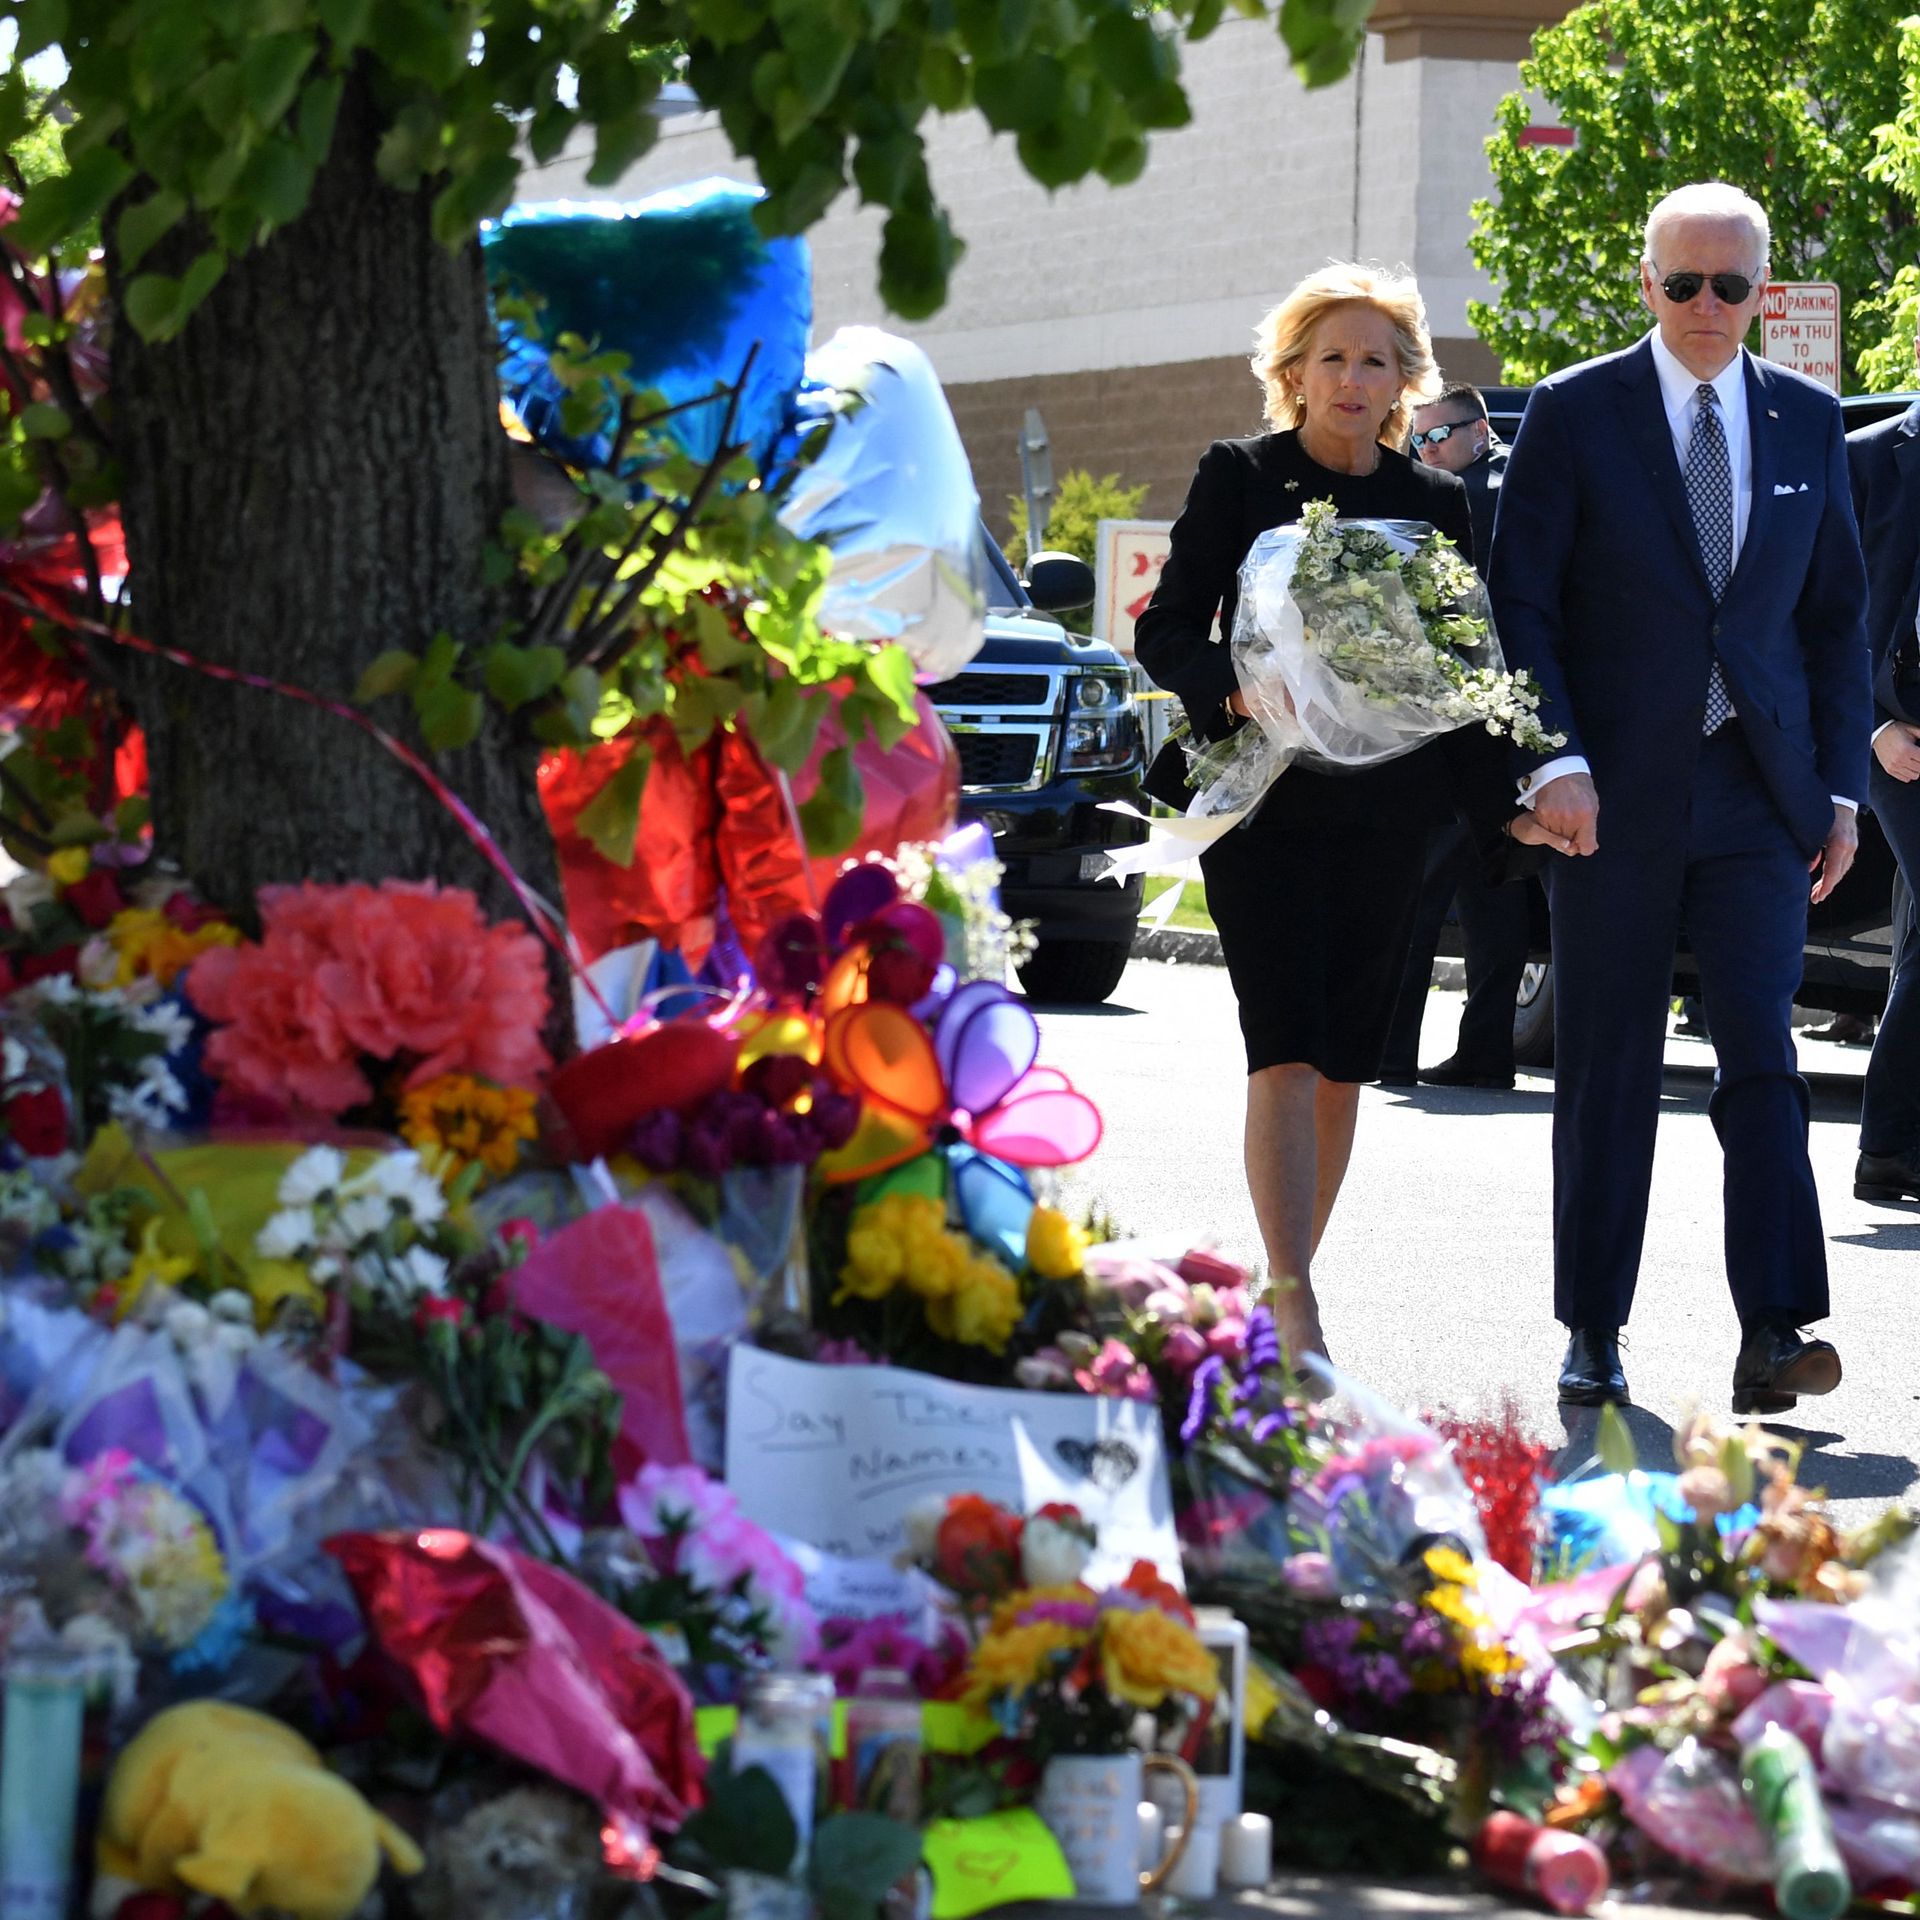 President Joe Biden and US First Lady Jill Biden arrive to a memorial near a Tops grocery store in Buffalo, New York, on May 17, 2022.